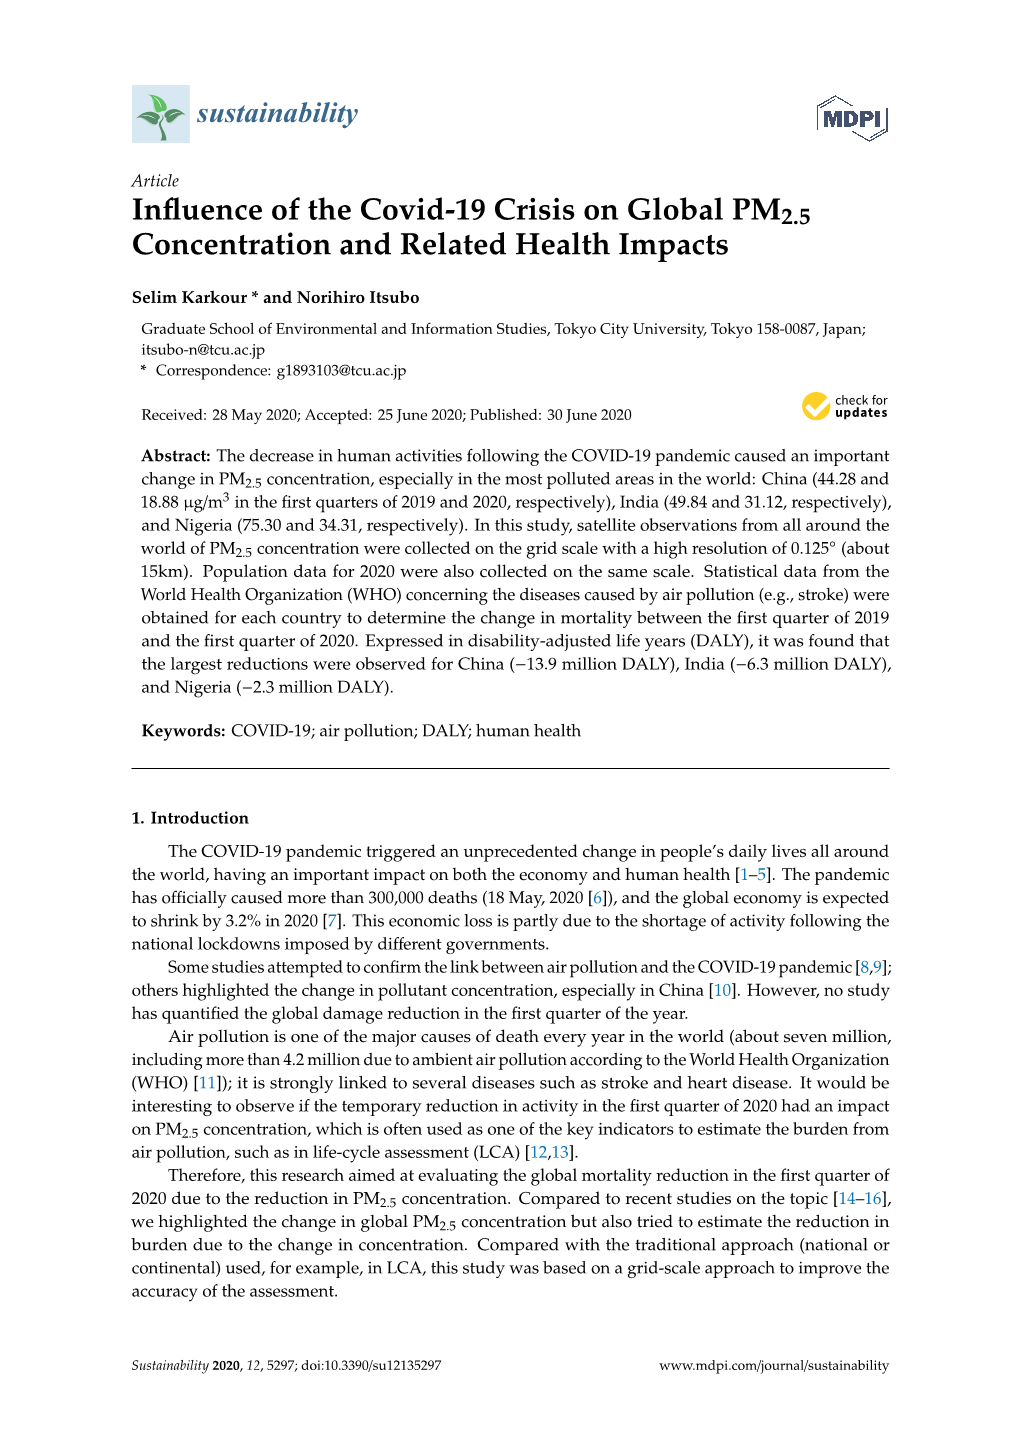 Influence of the Covid-19 Crisis on Global PM2.5 Concentration And